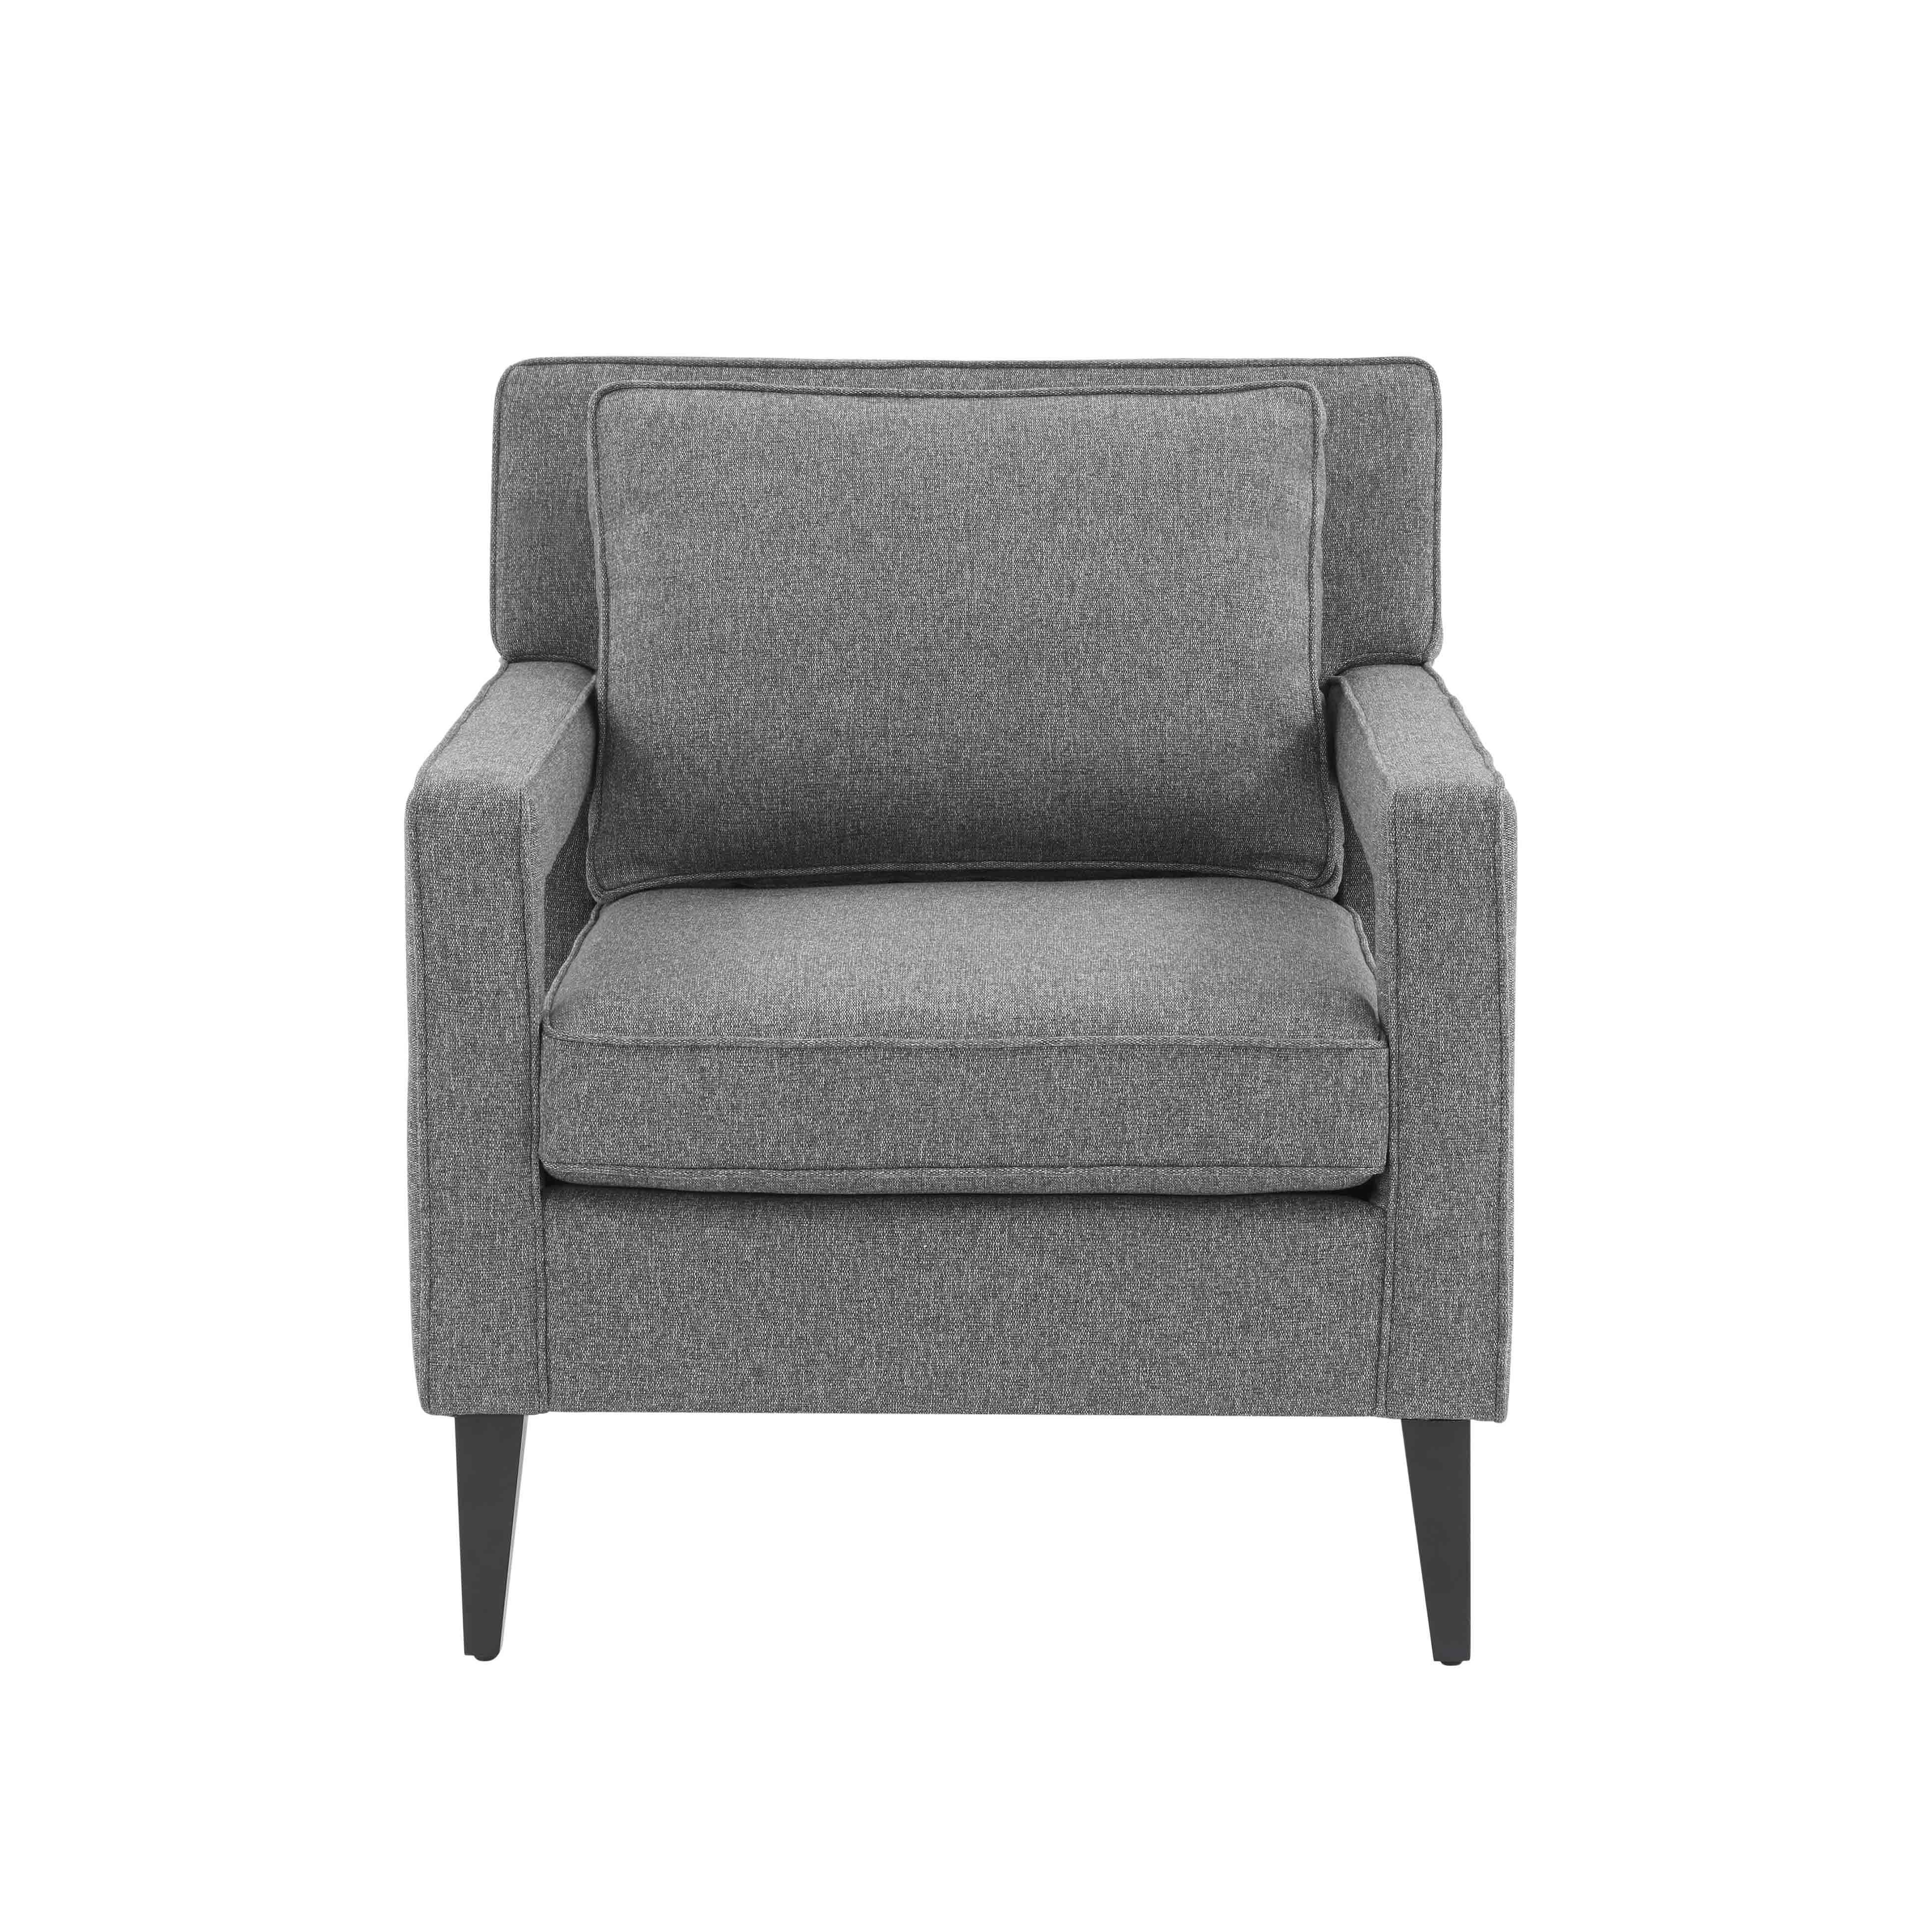 Luna Gray Accent Chair - Image 1